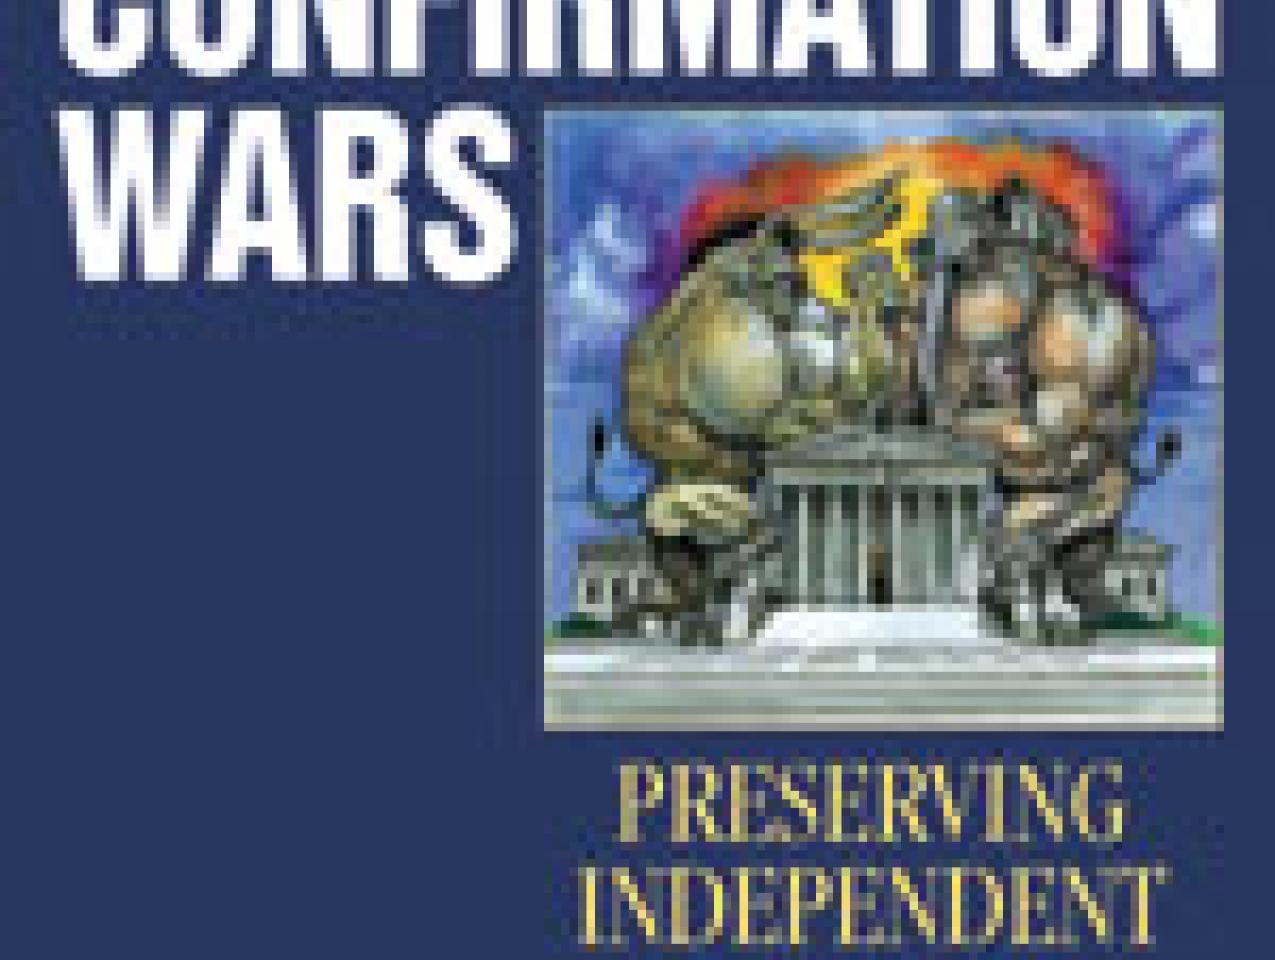 Confirmation Wars: Preserving Independent Courts in Angry Times